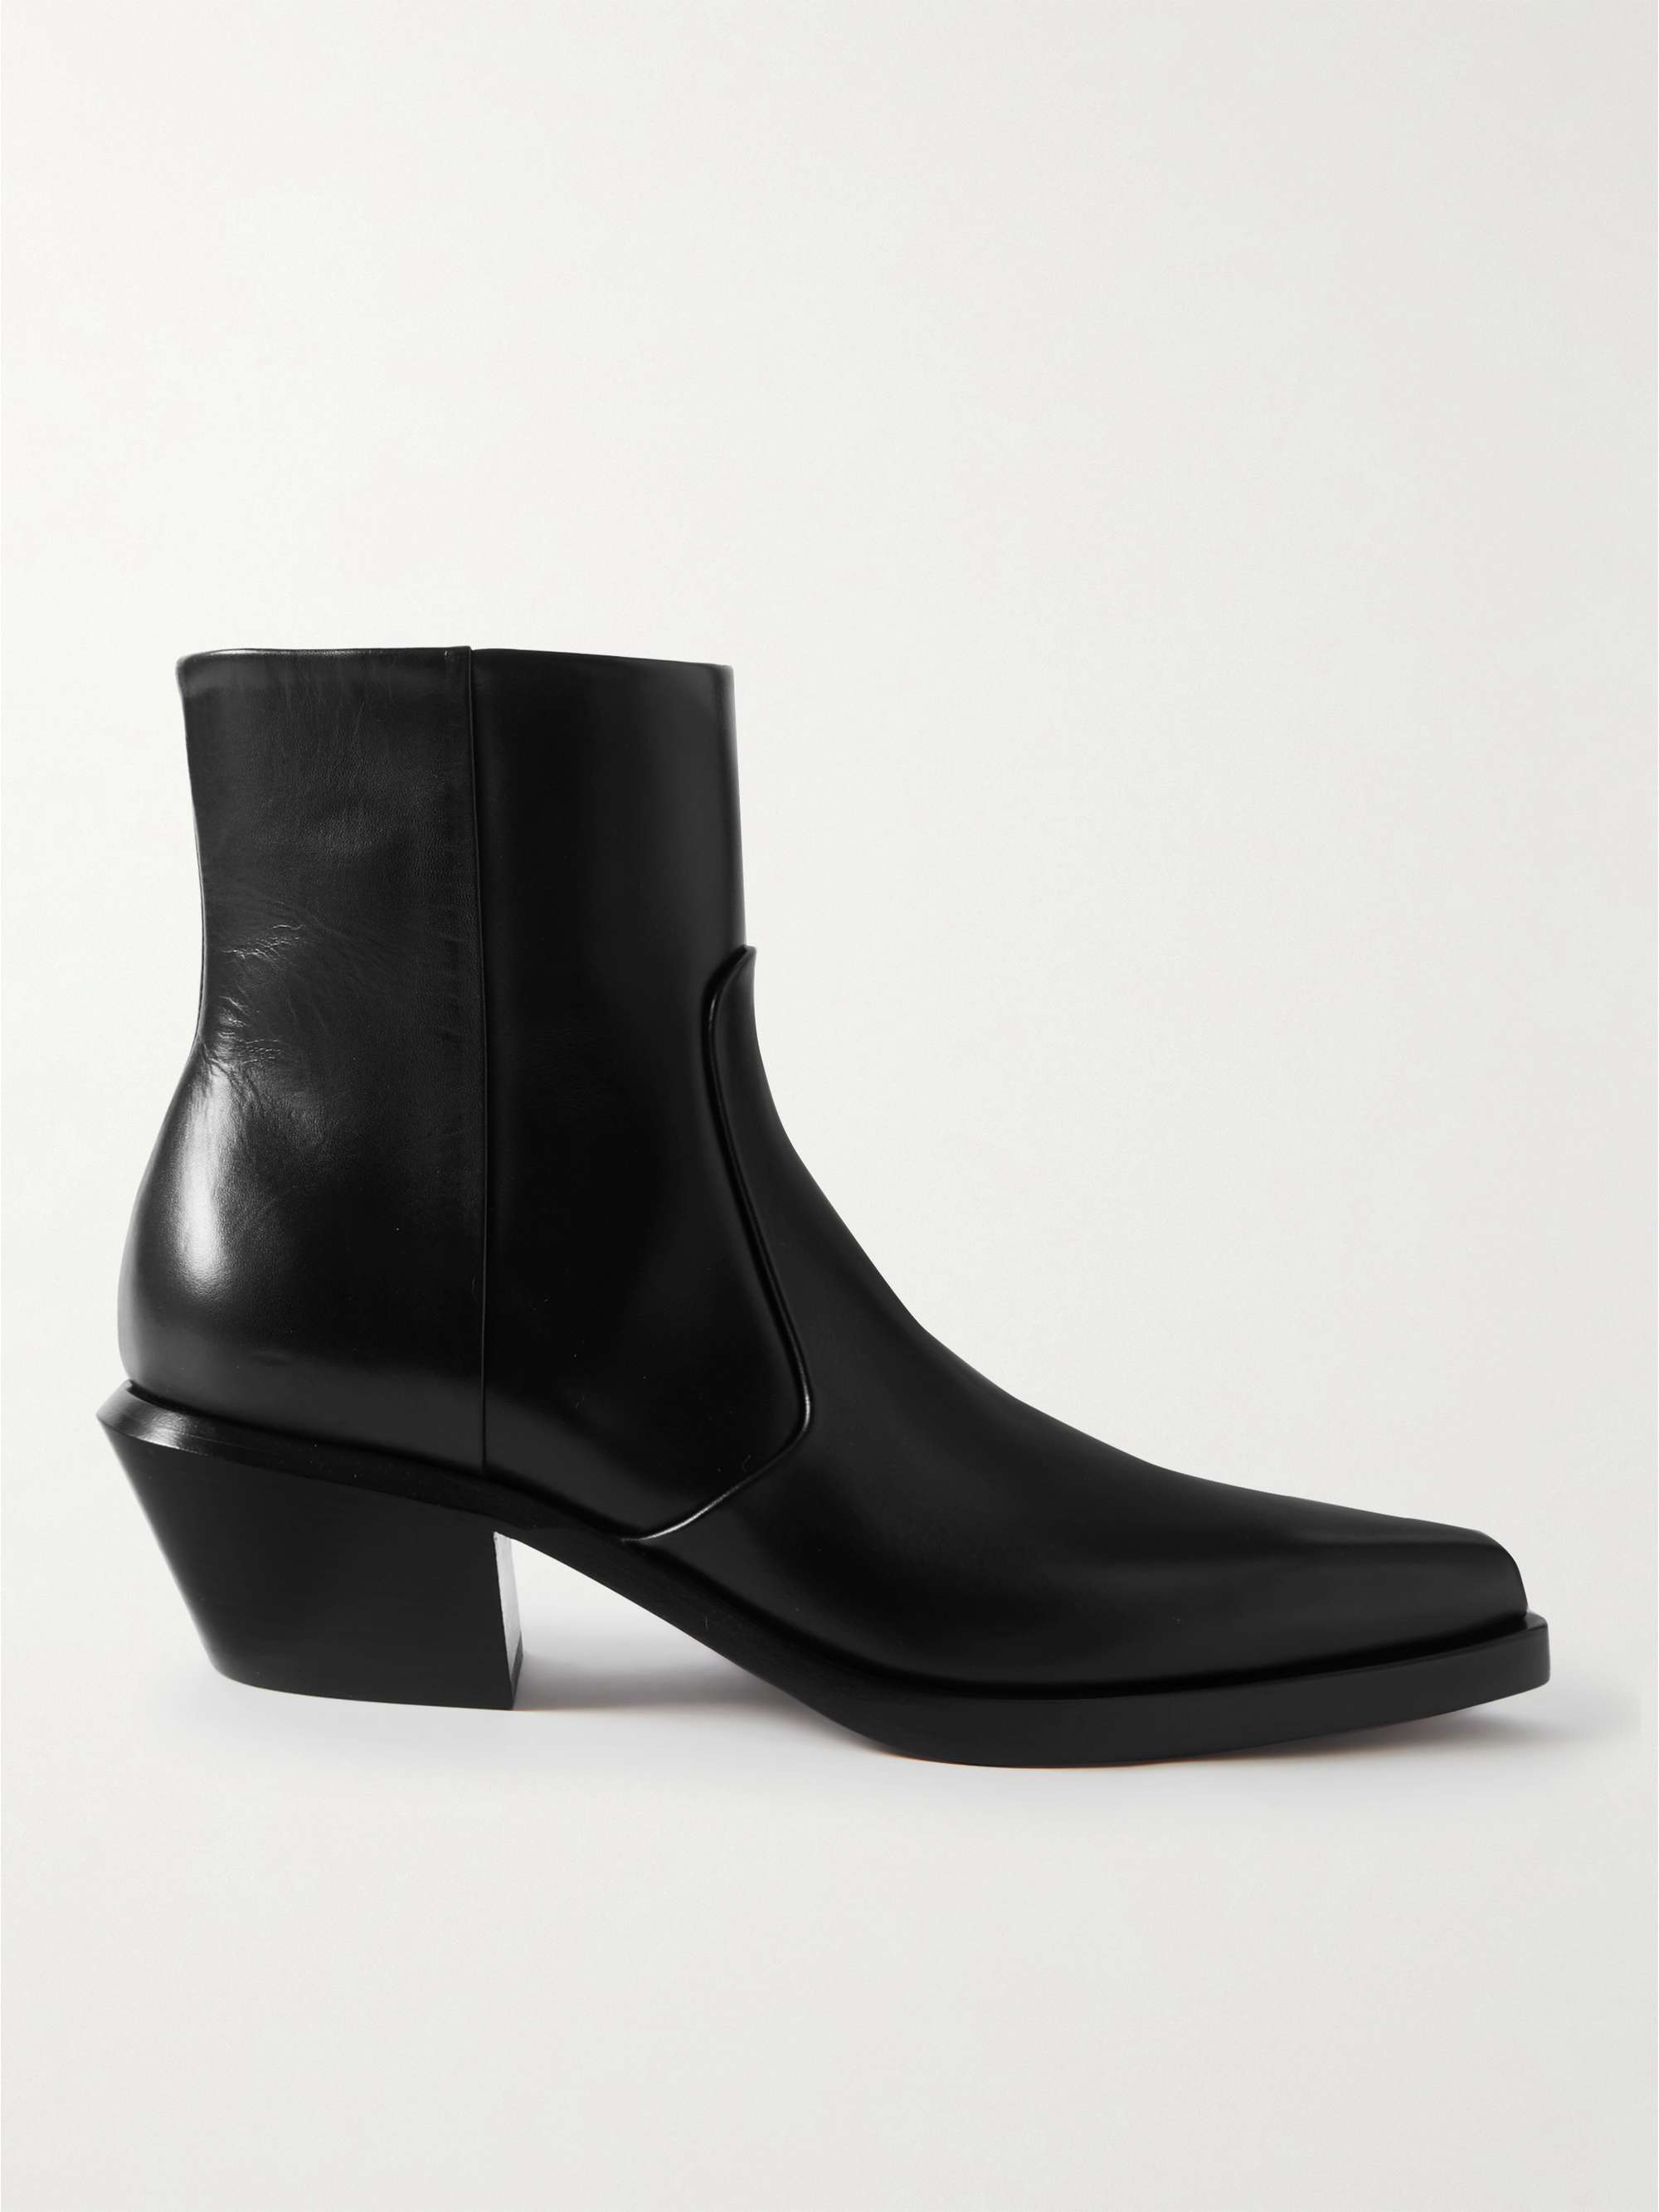 OFF-WHITE Texan Leather Boots | MR PORTER